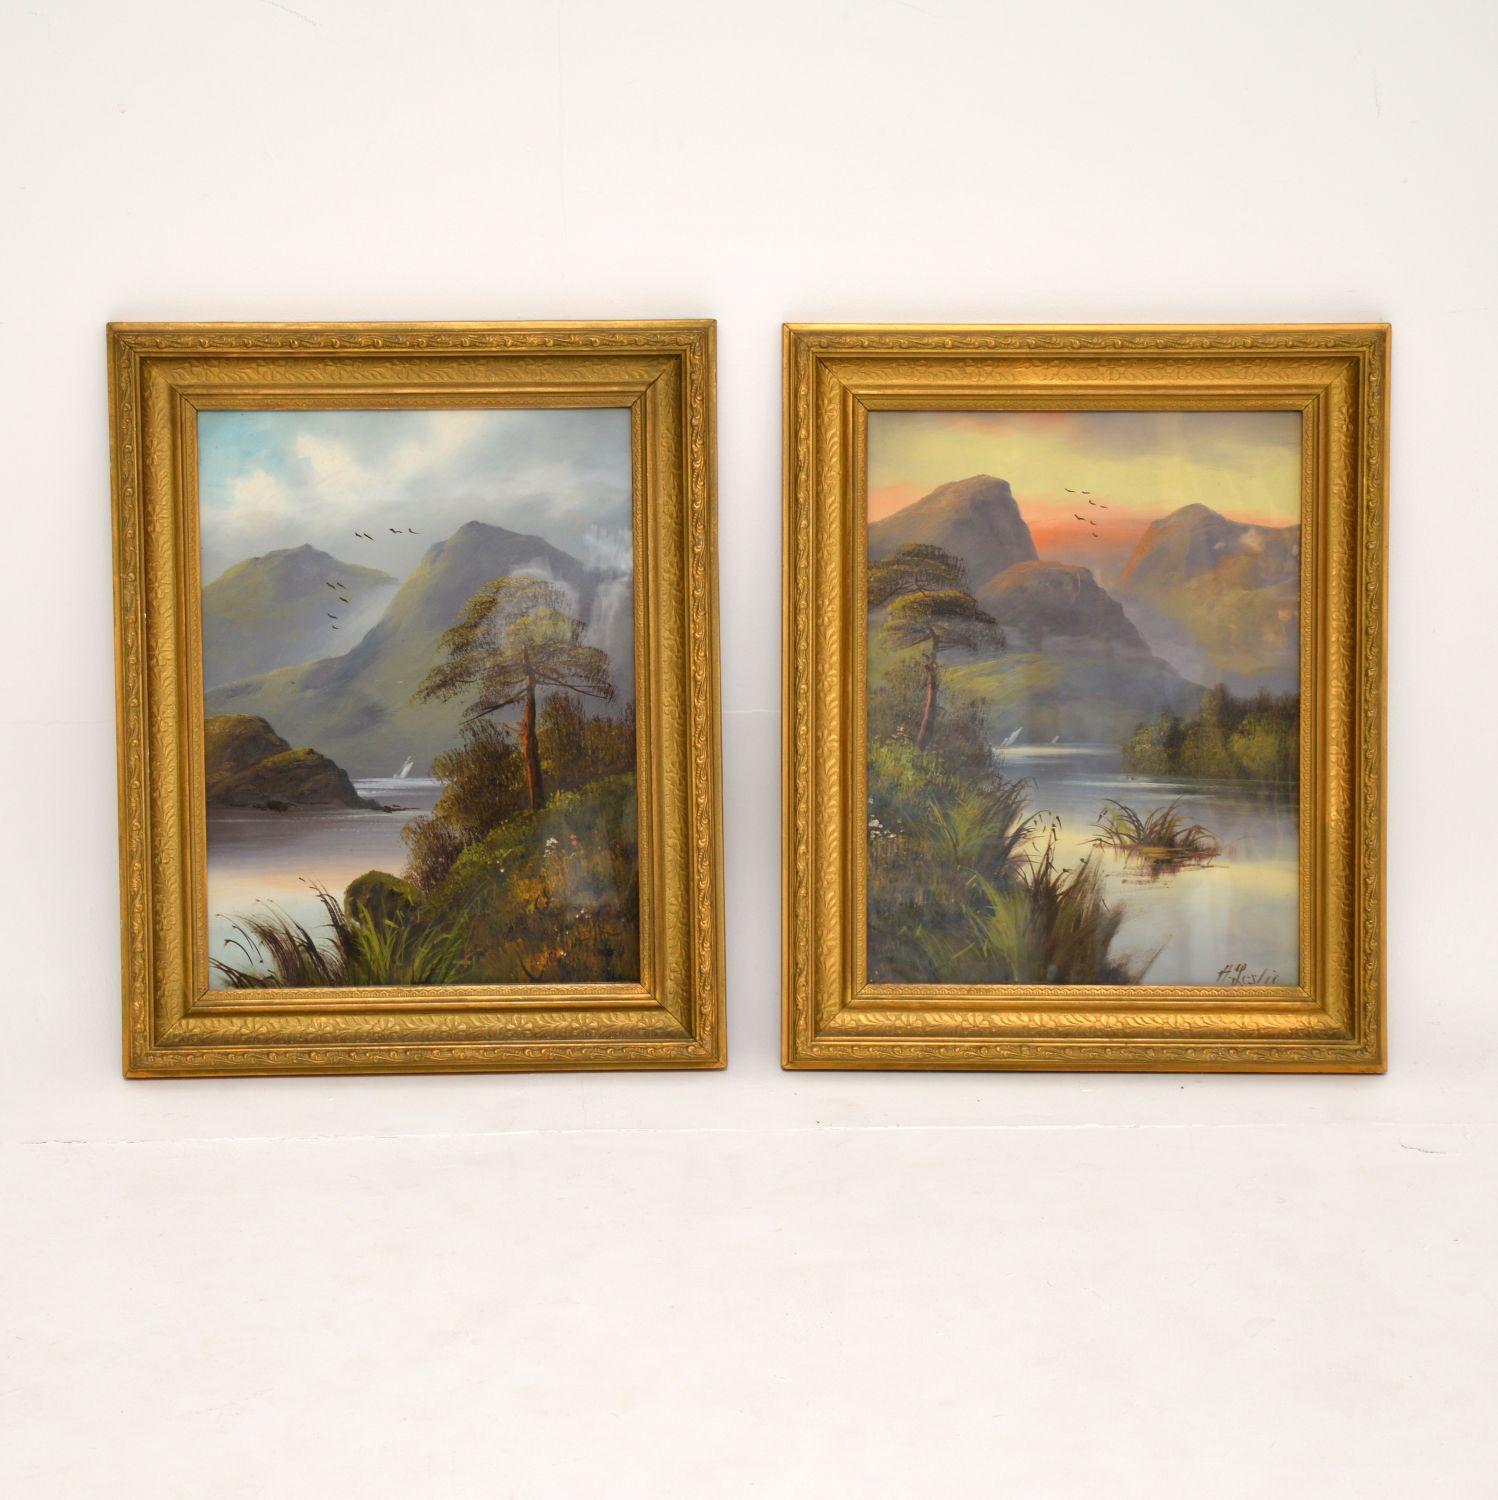 A stunning pair of antique Victorian oil paintings by the well known artist H. Leslie. He was a prolific artist, known for painting the Scottish highlands in and around the 1870-1880’s, so these are likely to date from that period.

They are